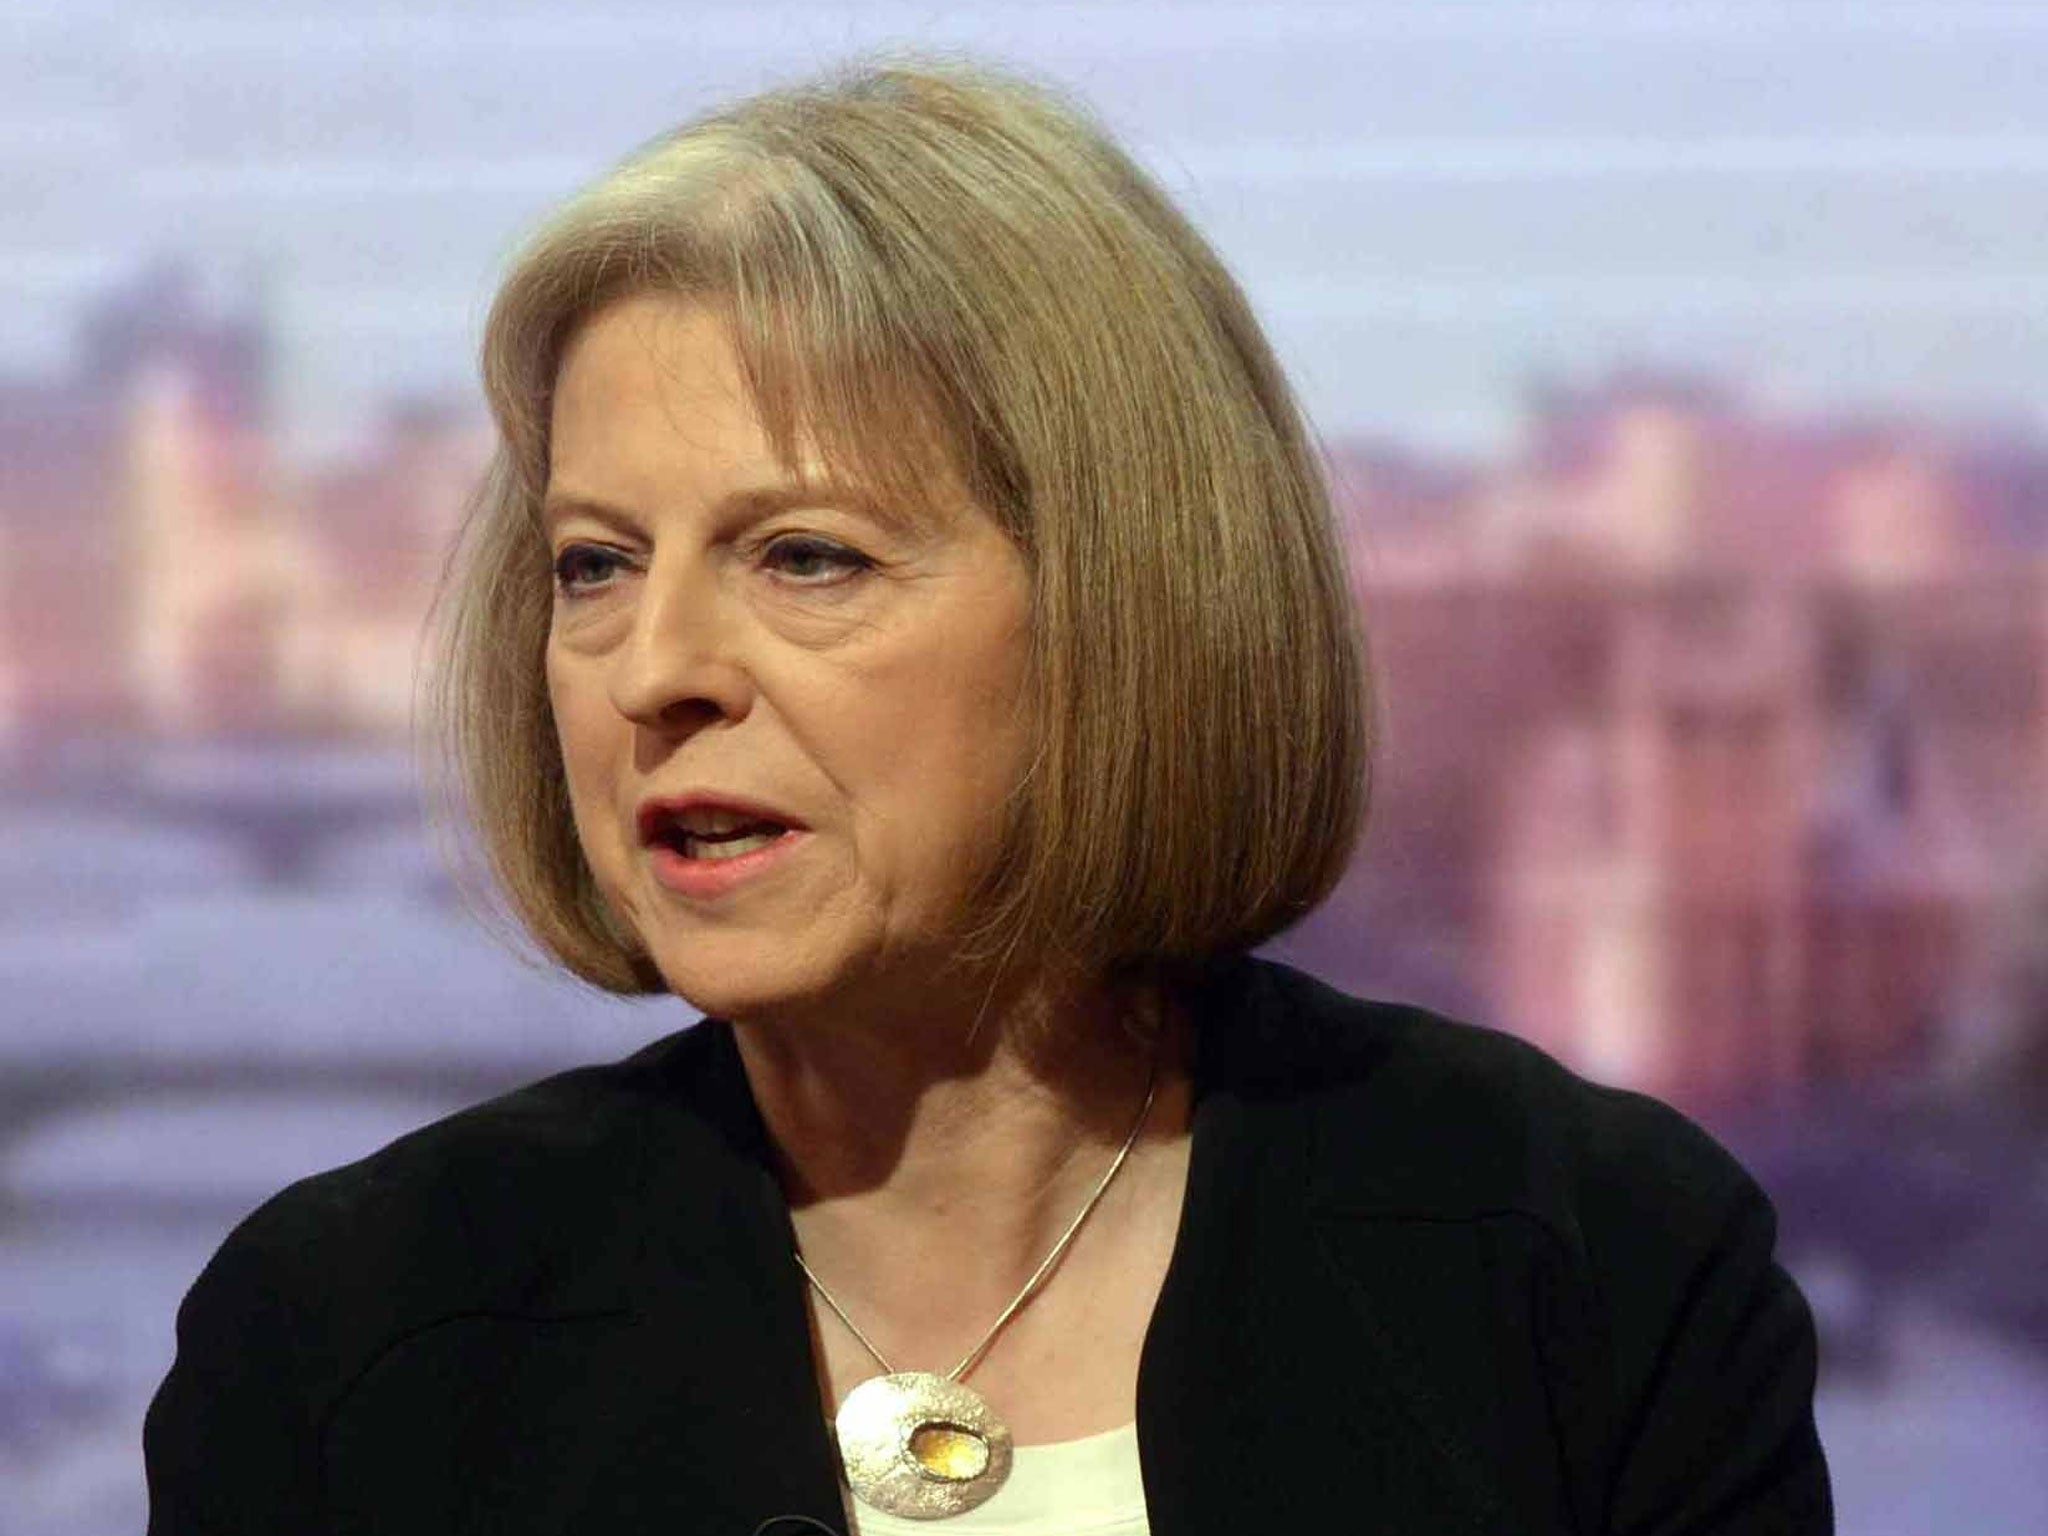 The tactic has raised concerns because the standard of proof required to deport someone whom Home Secretary Theresa May considers is not 'conducive to the public good' is less than that needed for criminal trials